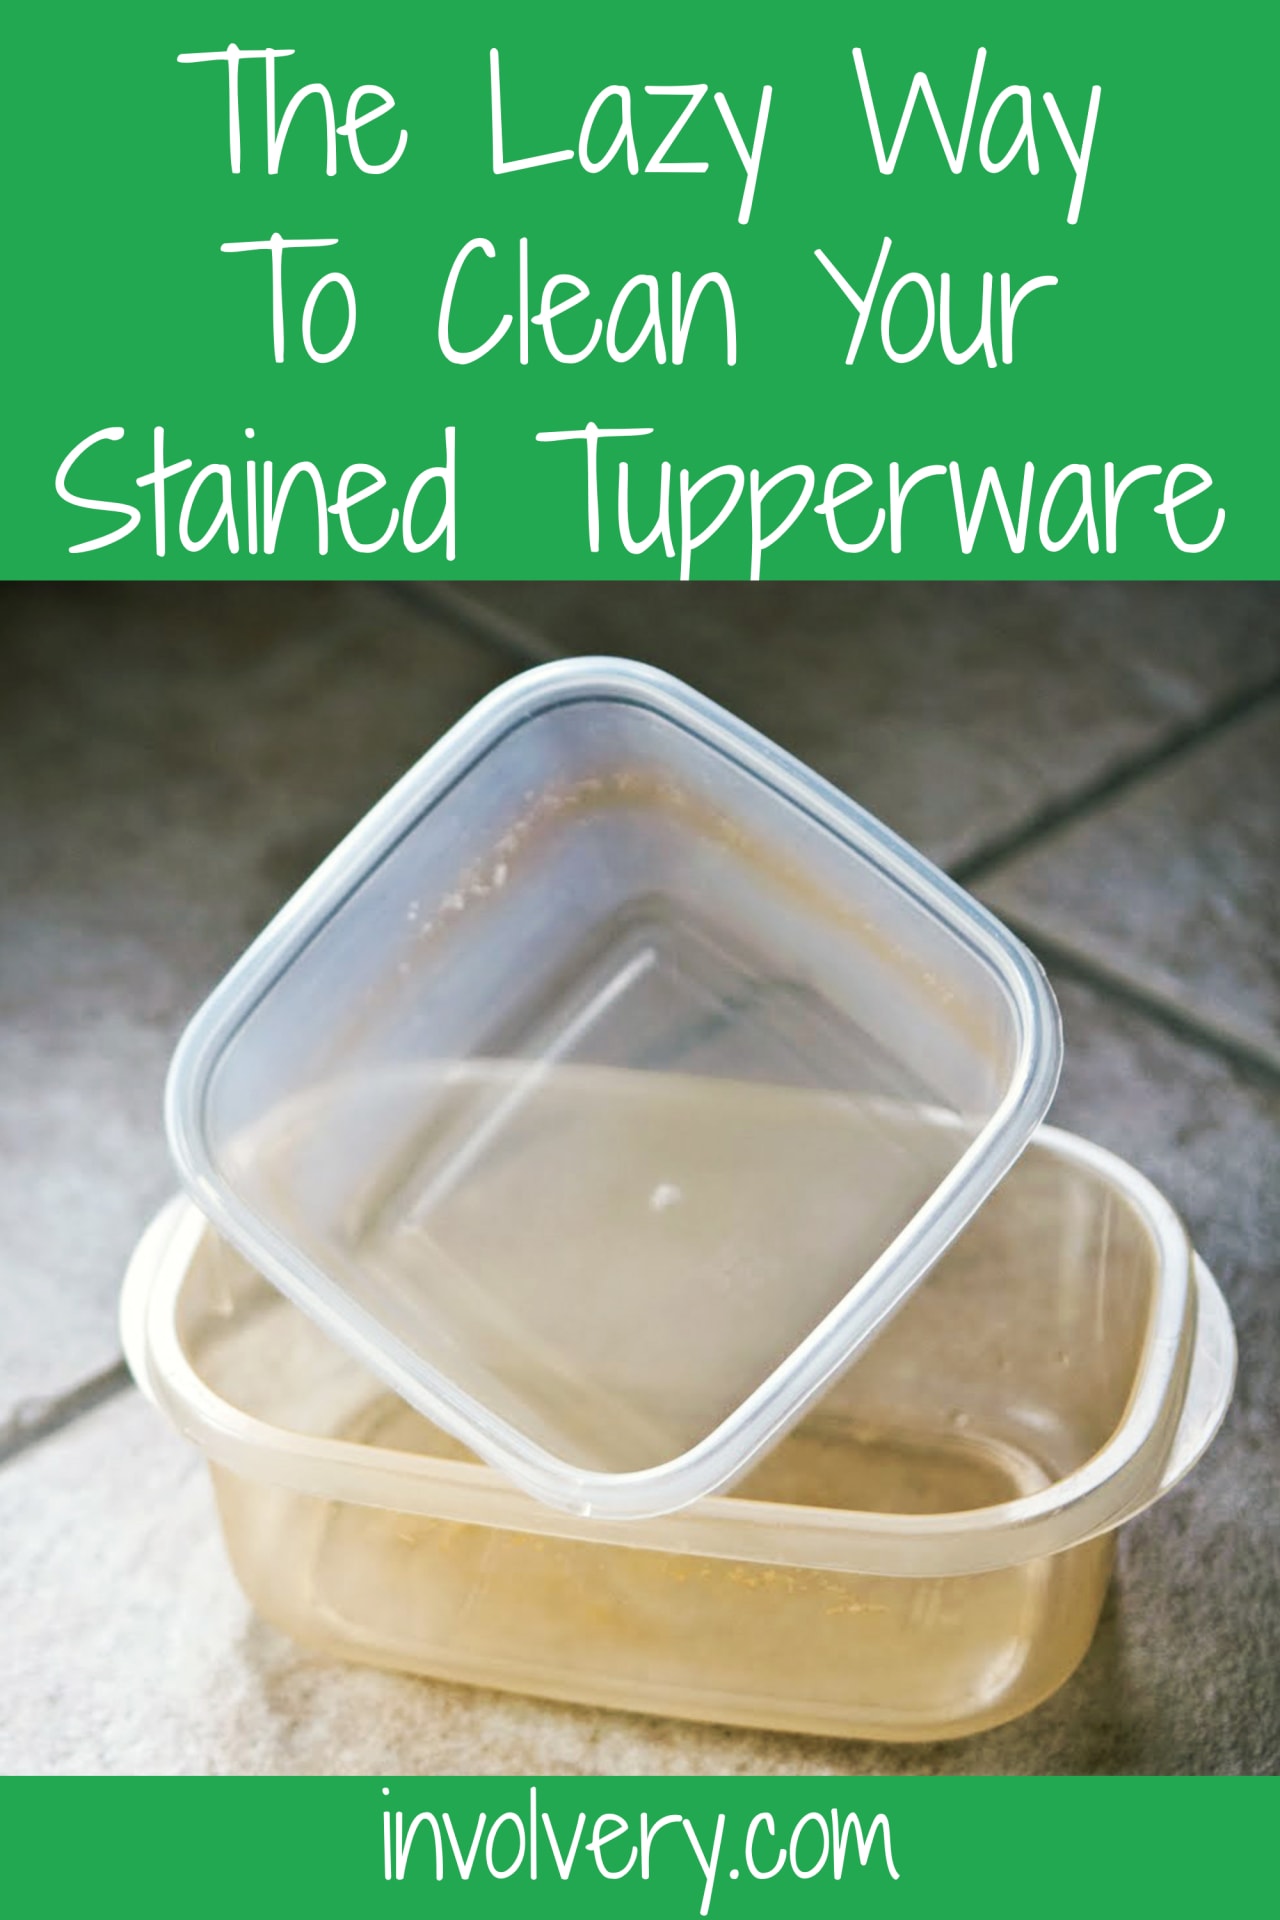 how to clean stained tupperware - kitchen cleaning hacks - Lazy kitchen cleaning hacks for lazy girls - how to clean stained Tupperware and stained plastic food containers the simple lazy way